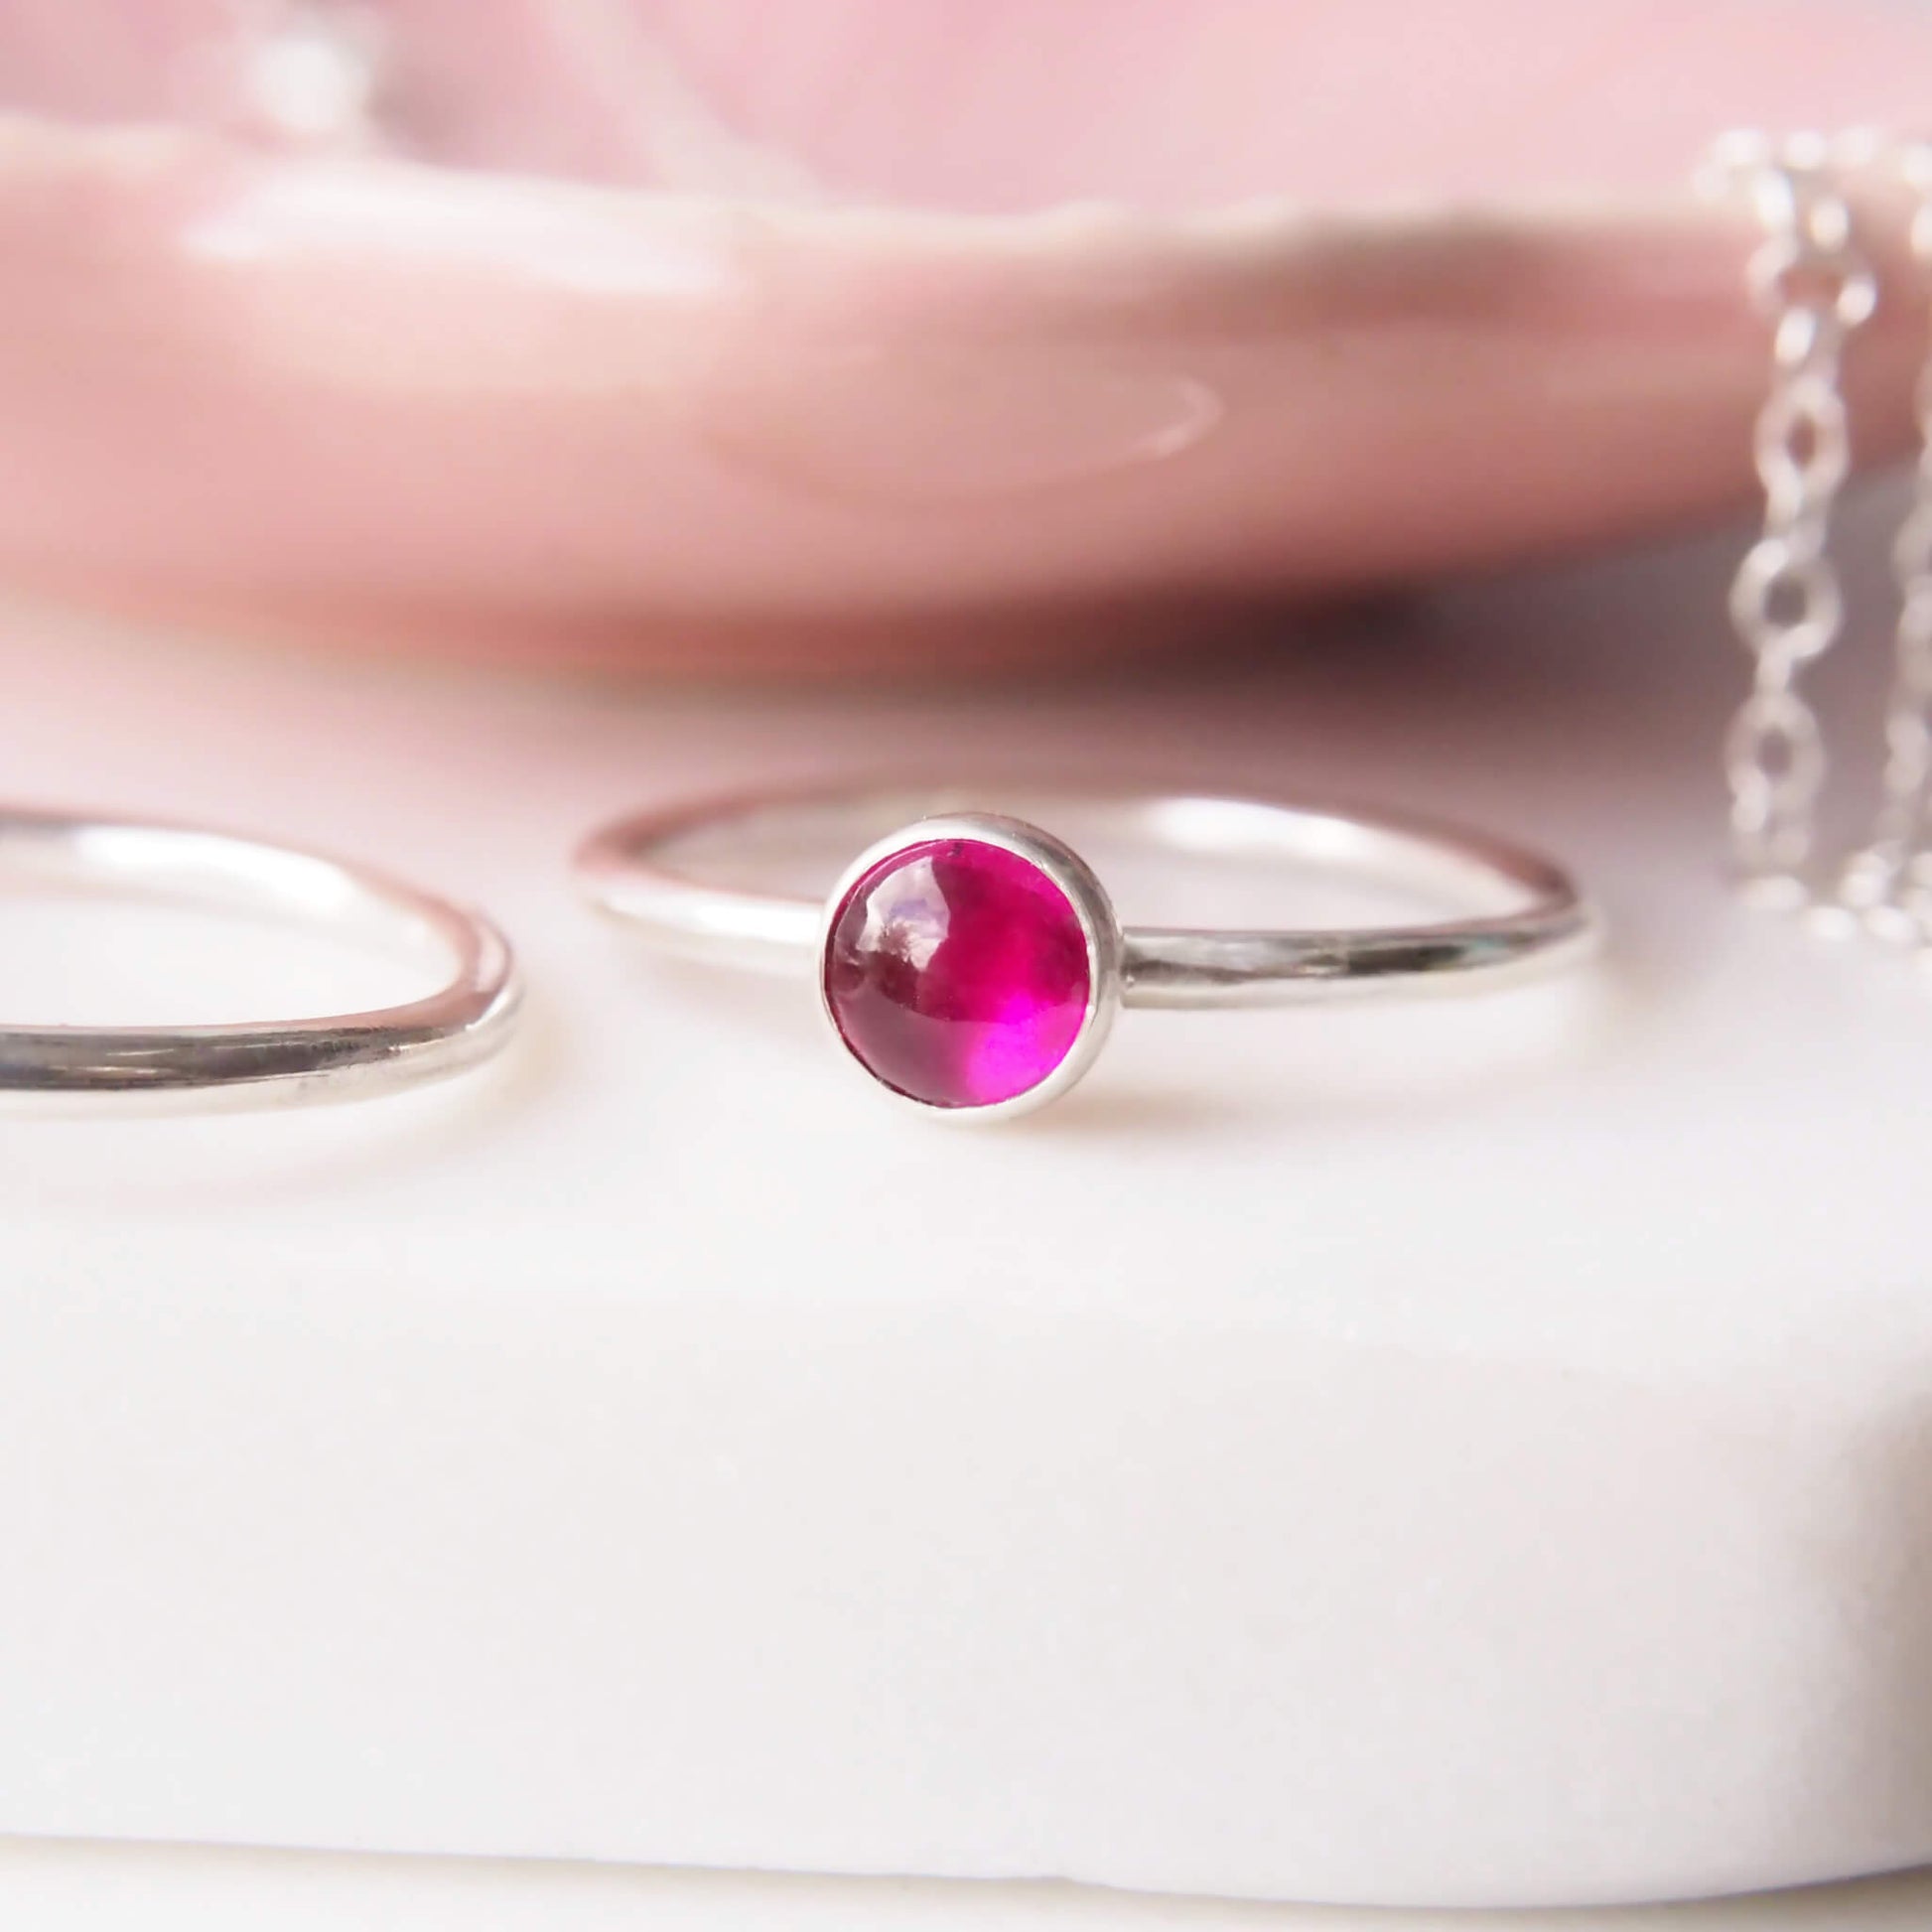 Ruby Birthstone Ring for July Birthday. A simple Lab Ruby round gemstone solitaire ring made with Sterling Silver and a manmade ruby. Handmade to your ring size by maram jewellery in the UK